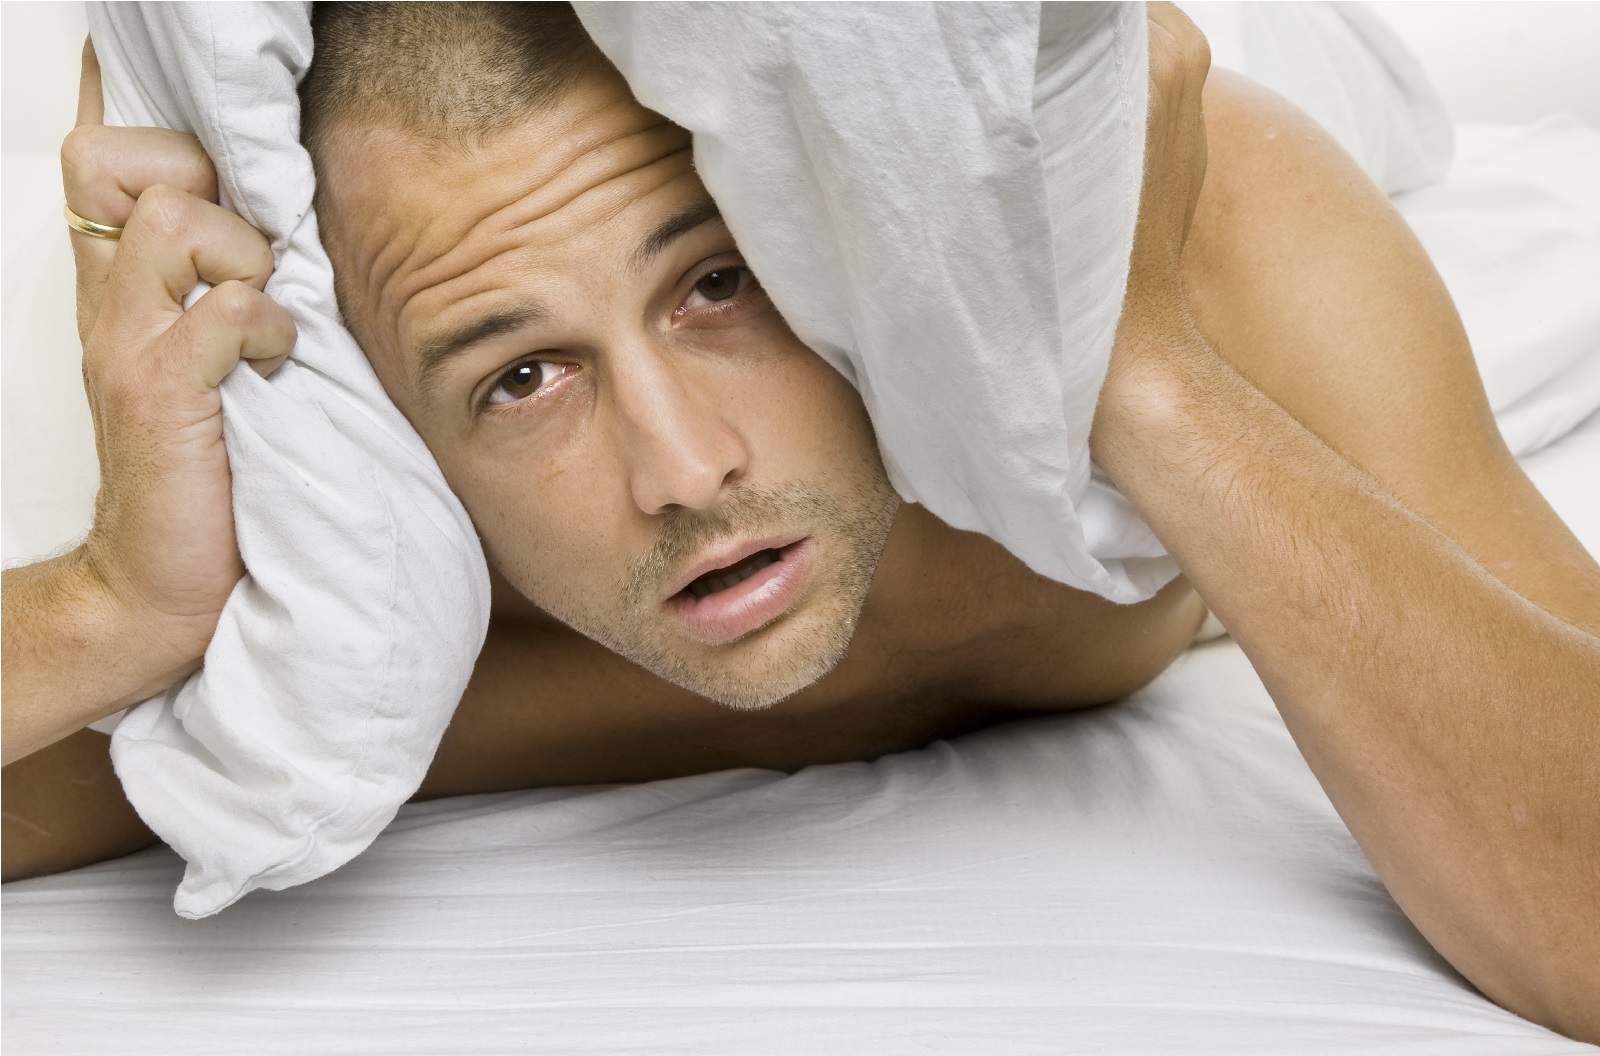 Man trying to sleep with a pillow over his head